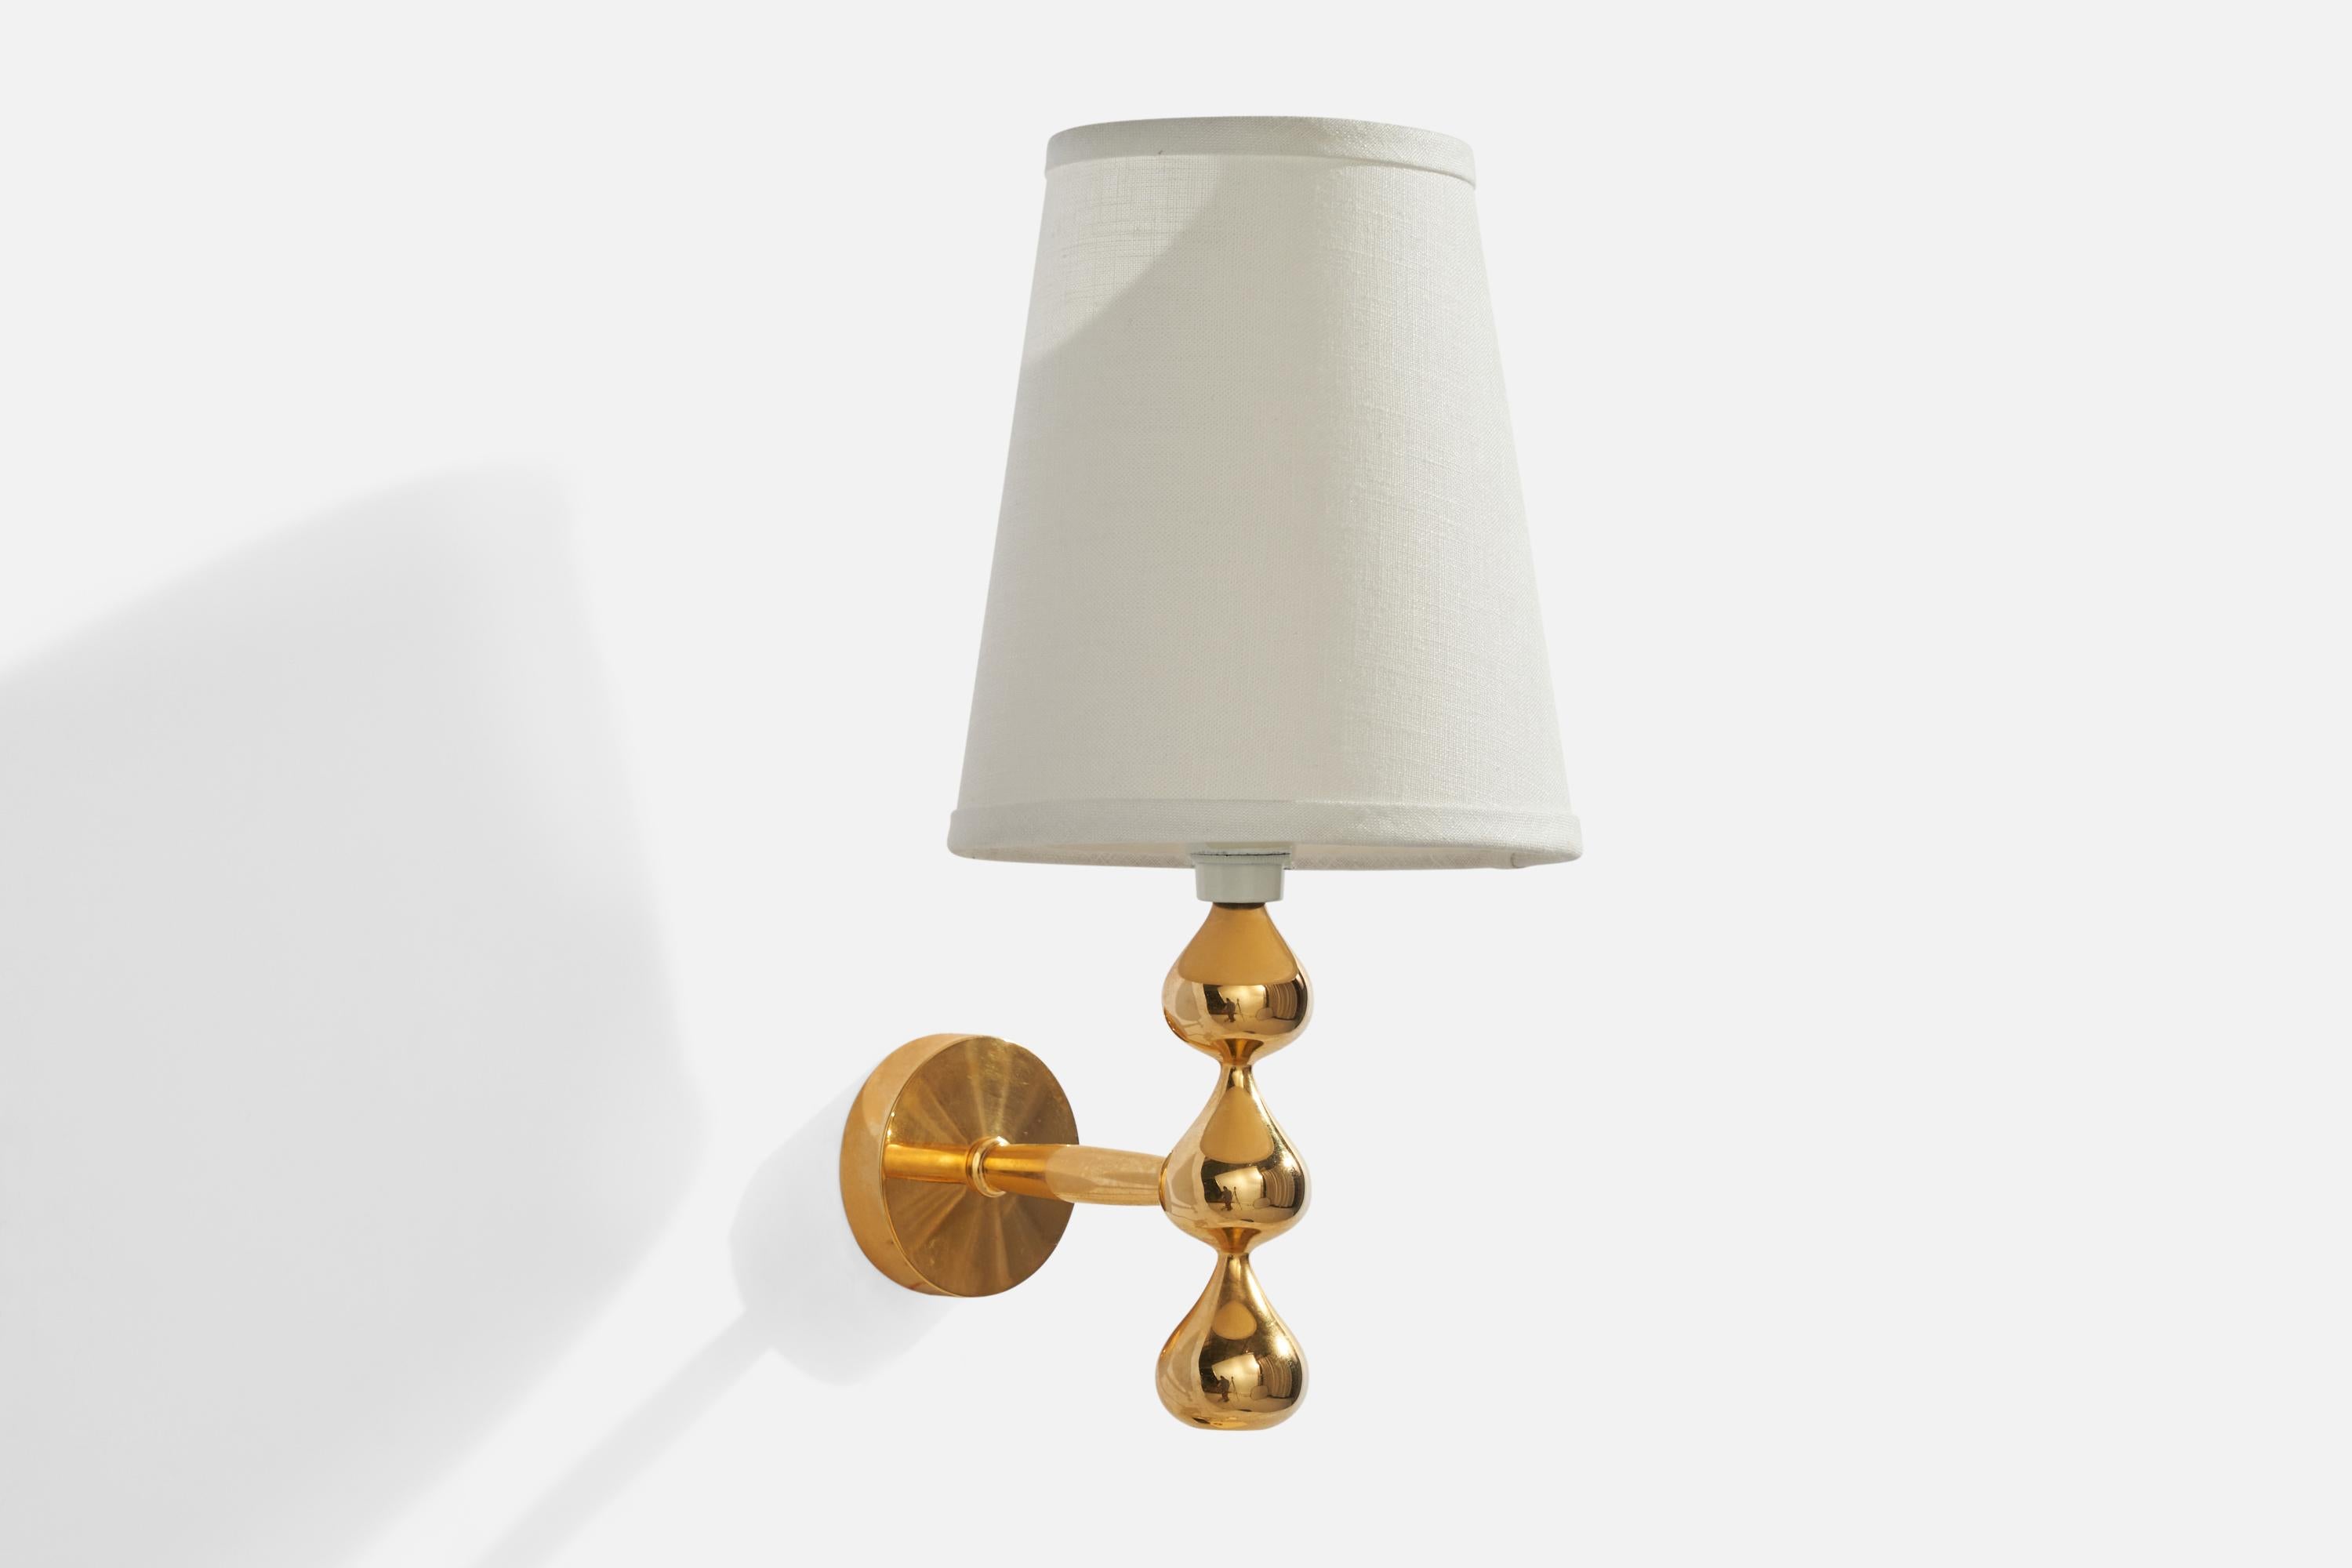 A gold-plated metal and white fabric wall light designed and produced by Asmussen Design, Denmark, c. 1980s.

Overall Dimensions (inches): 12.5” H x 6” W x 7.75” D
Back Plate Dimensions (inches): 2.75” H x 2.75” W x .75” D
Bulb Specifications: E-14